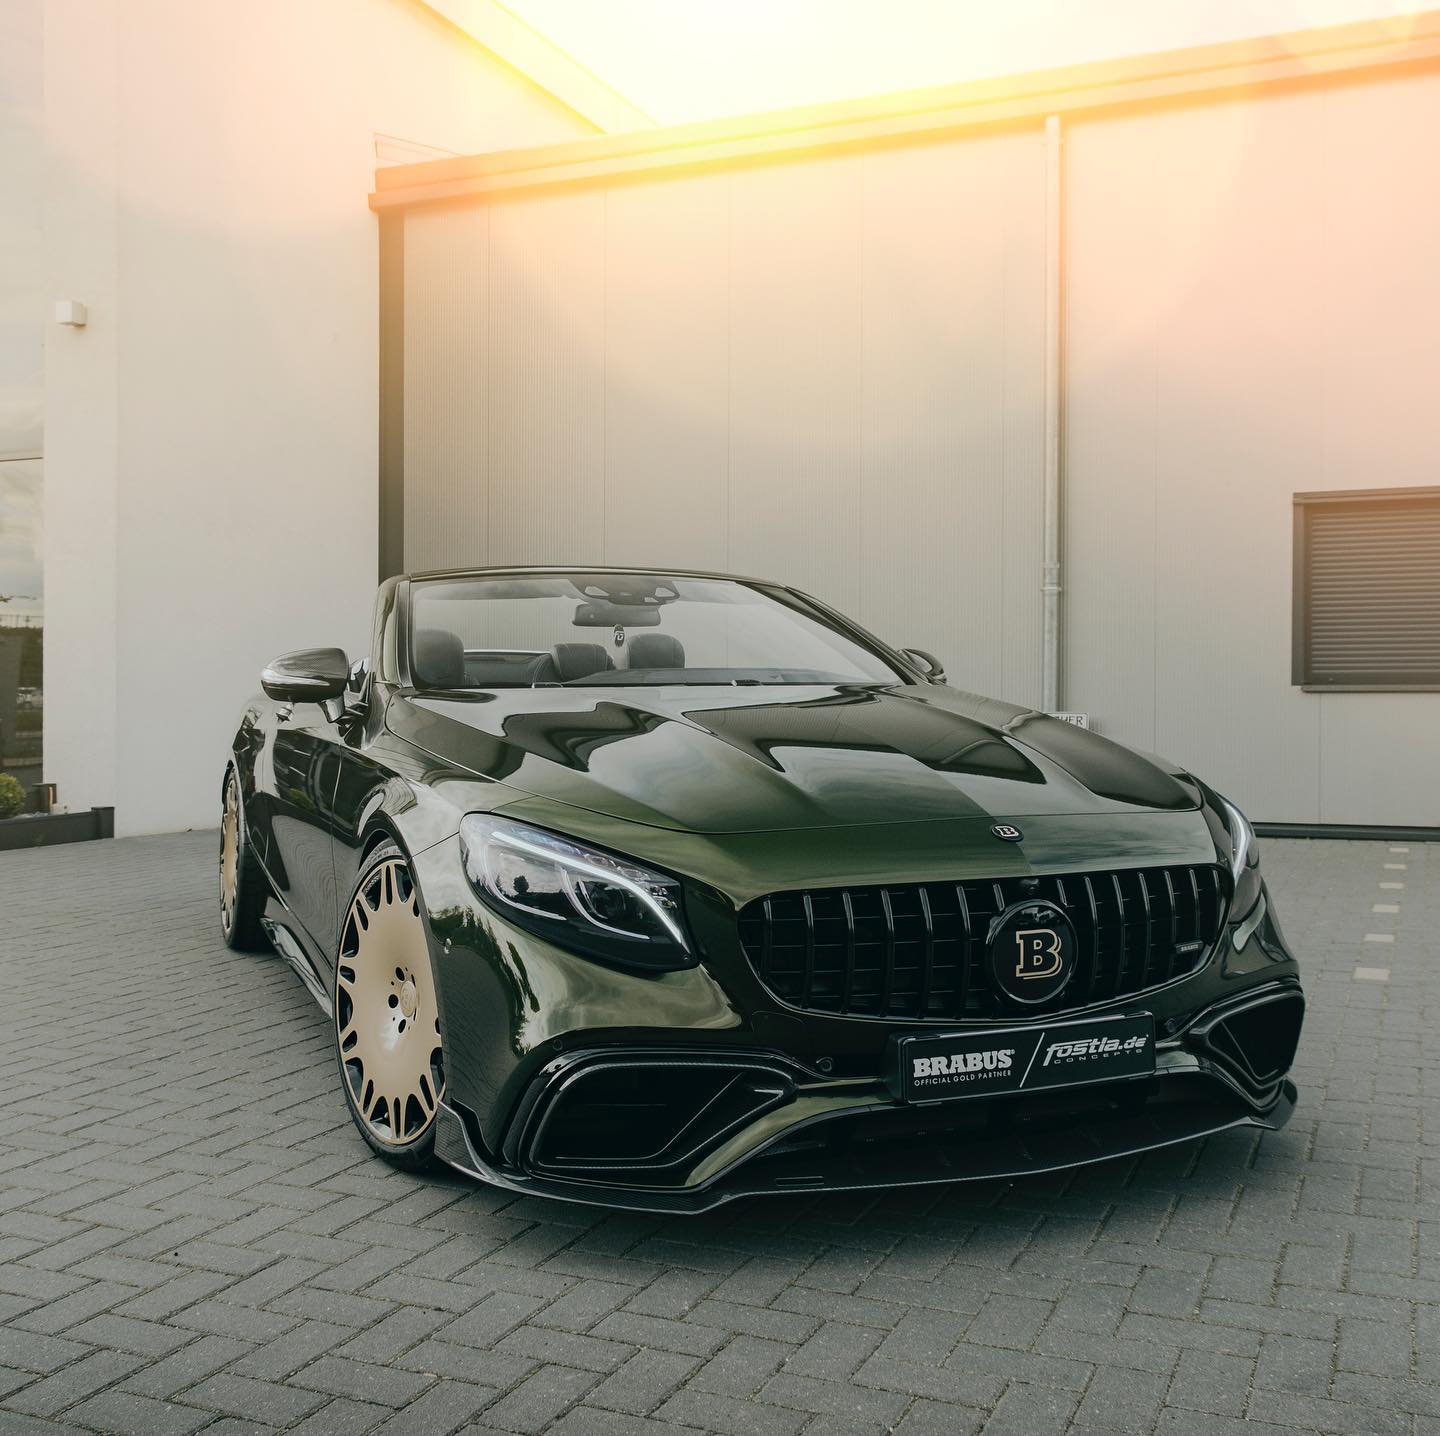 Mercedes Amg S63 Cabriolet Gets A Makeover From Brabus And Fostla